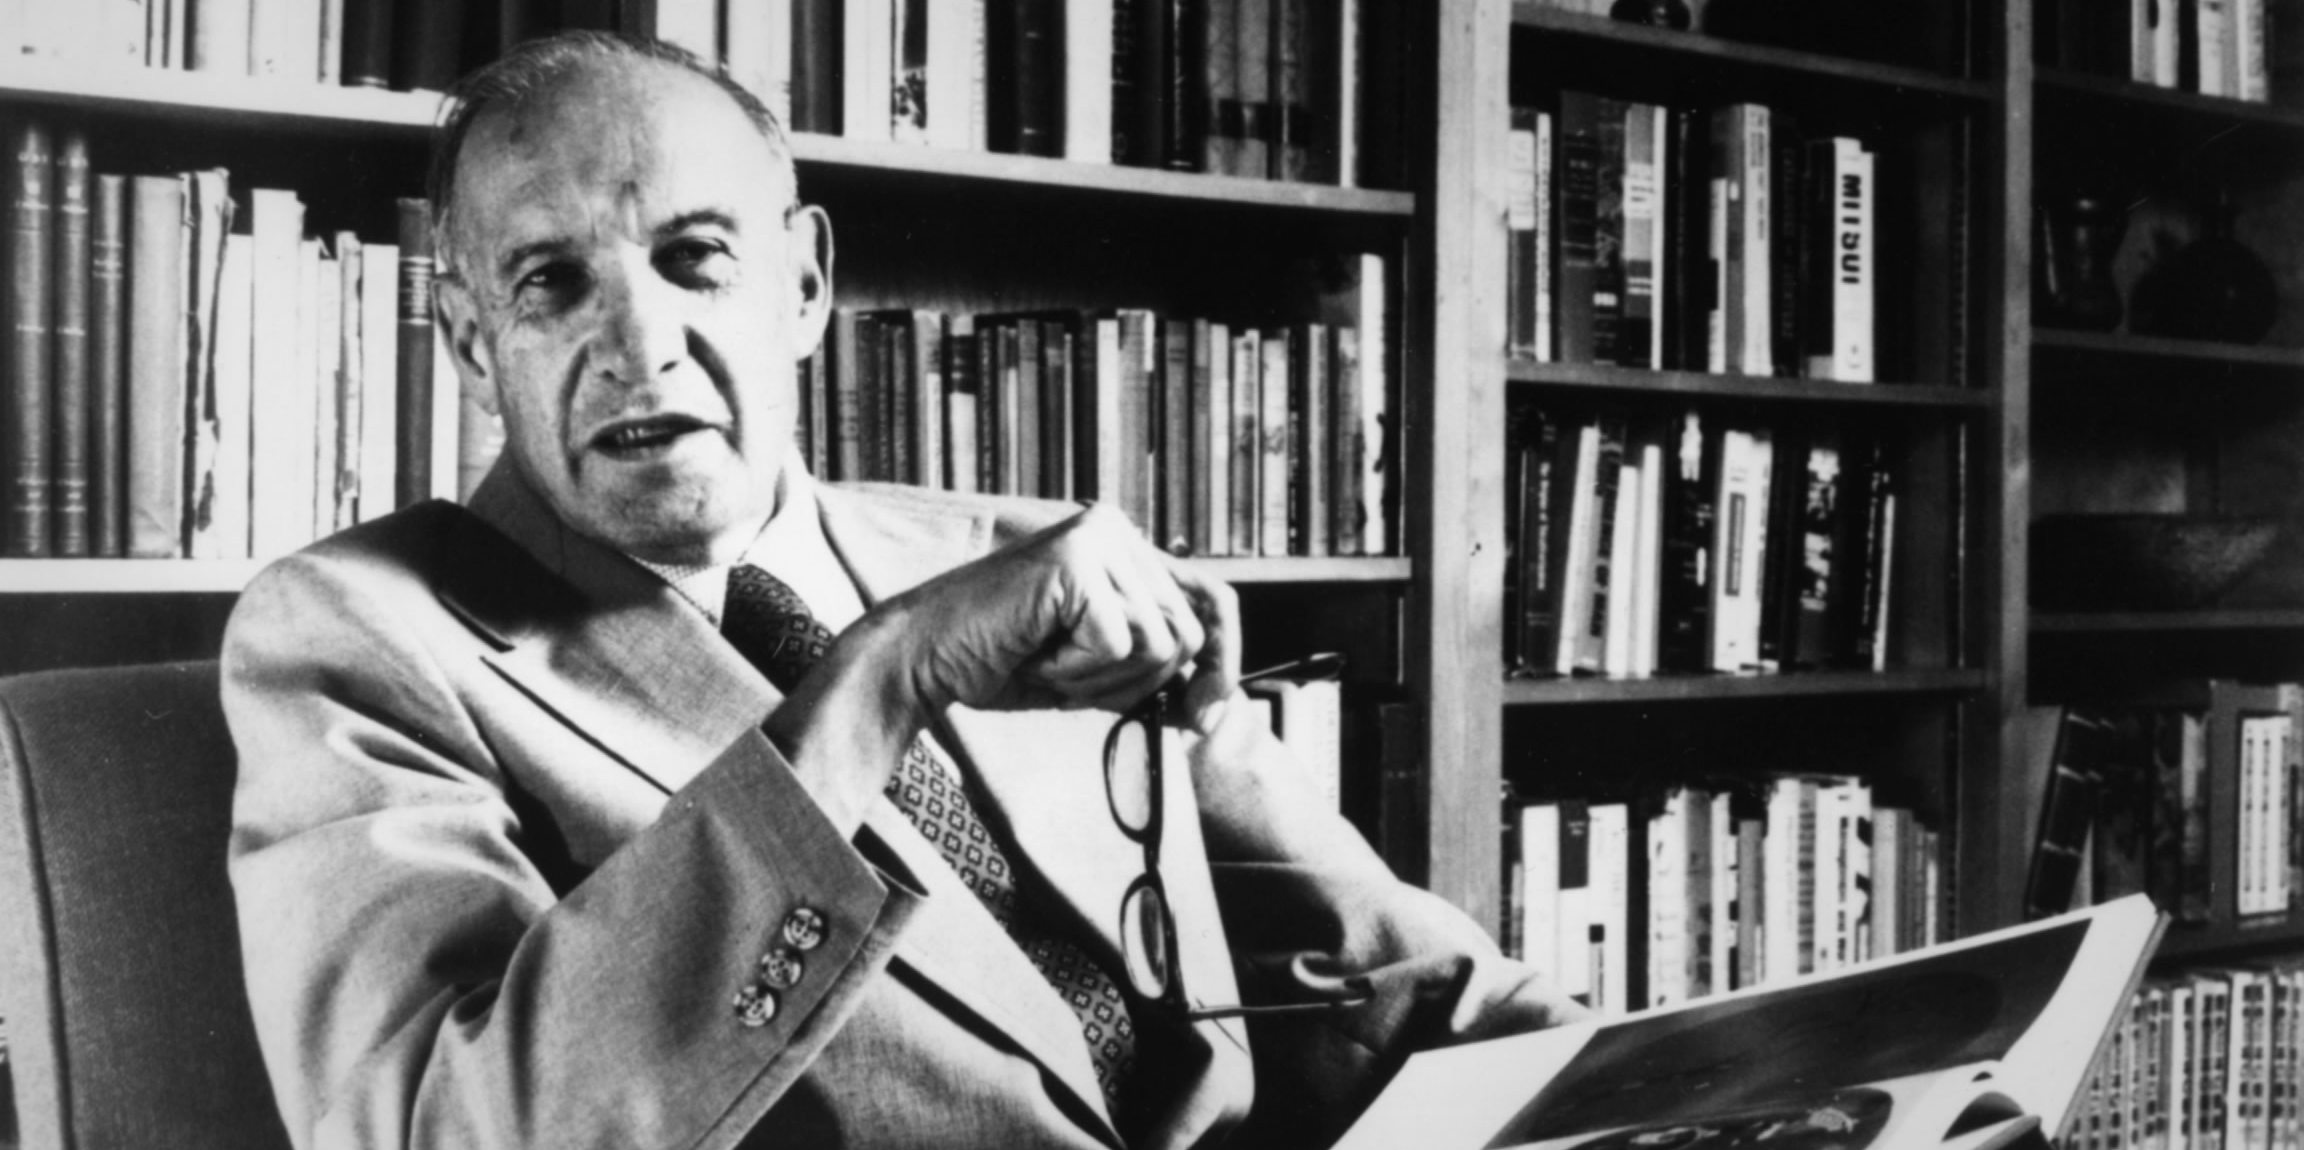 8 Lessons on Effectiveness (From Peter Drucker’s Effective Executive)